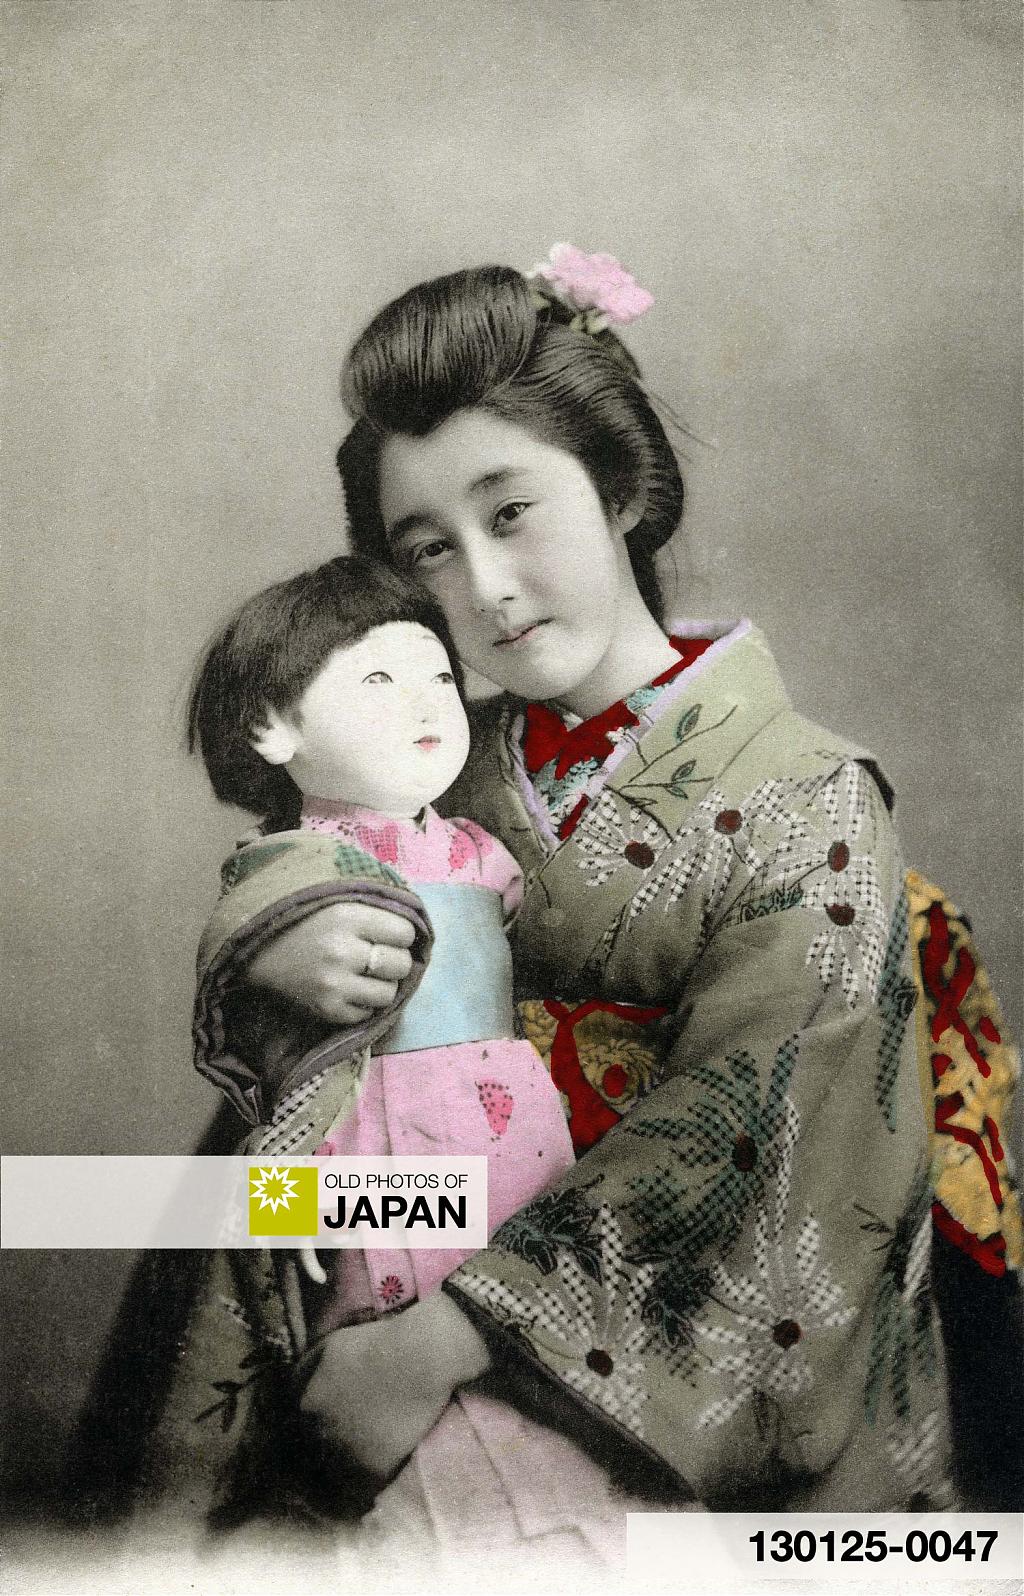 130125-0047 - Japanese Woman with Doll, 1900s